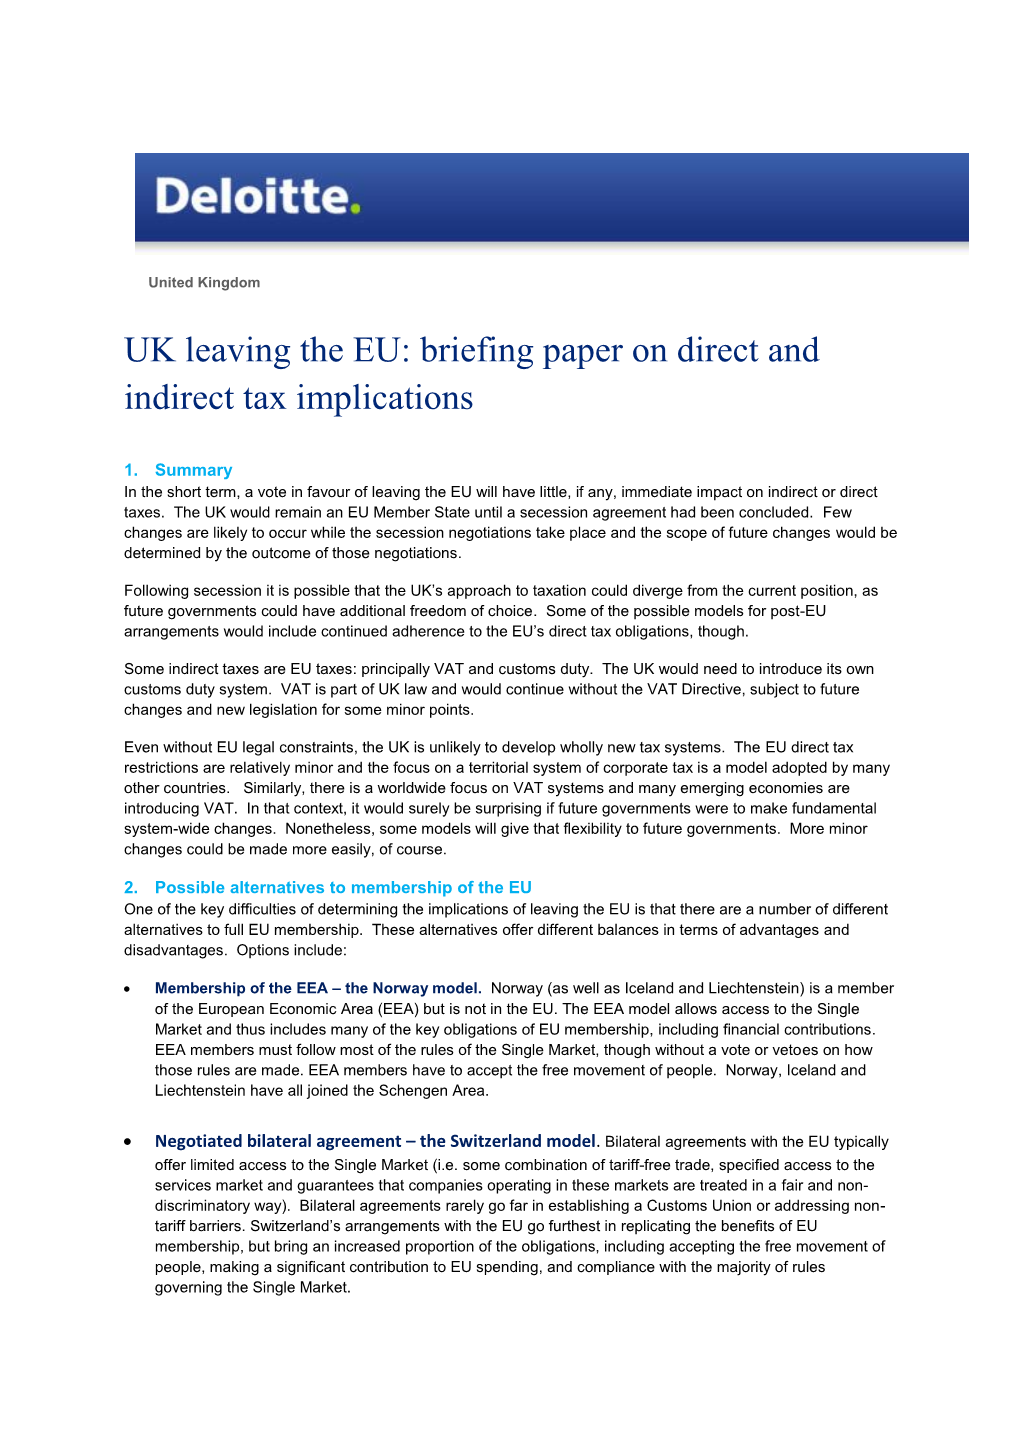 UK Leaving the EU: Briefing Paper on Direct and Indirect Tax Implications